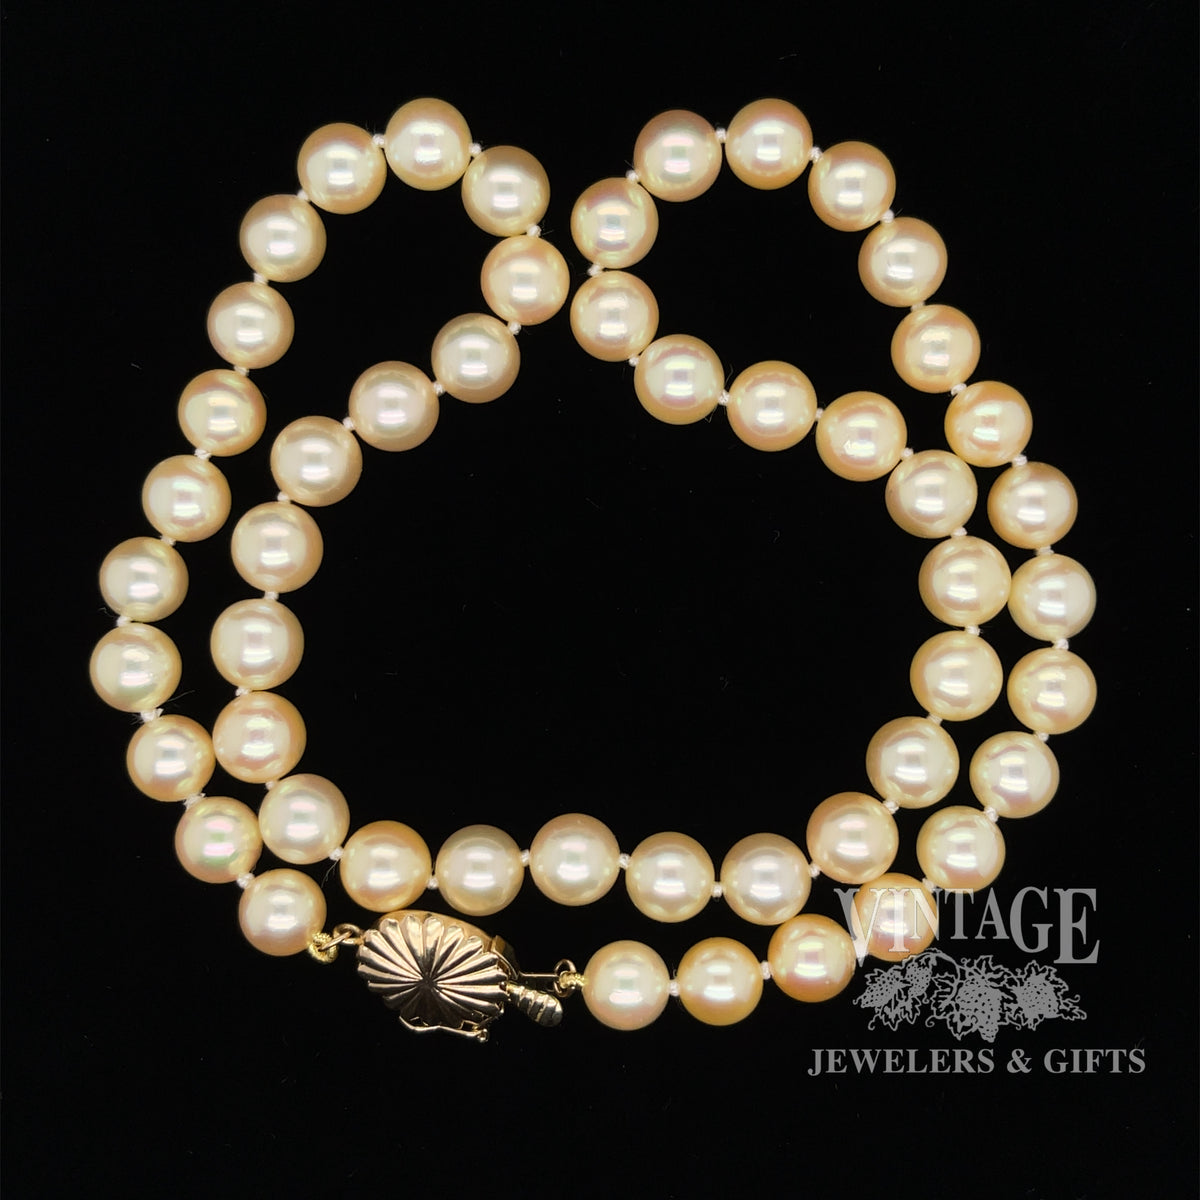 Glendora Gold Chain Necklace with Toggle Clasp and Pearl Pendant 16 inch